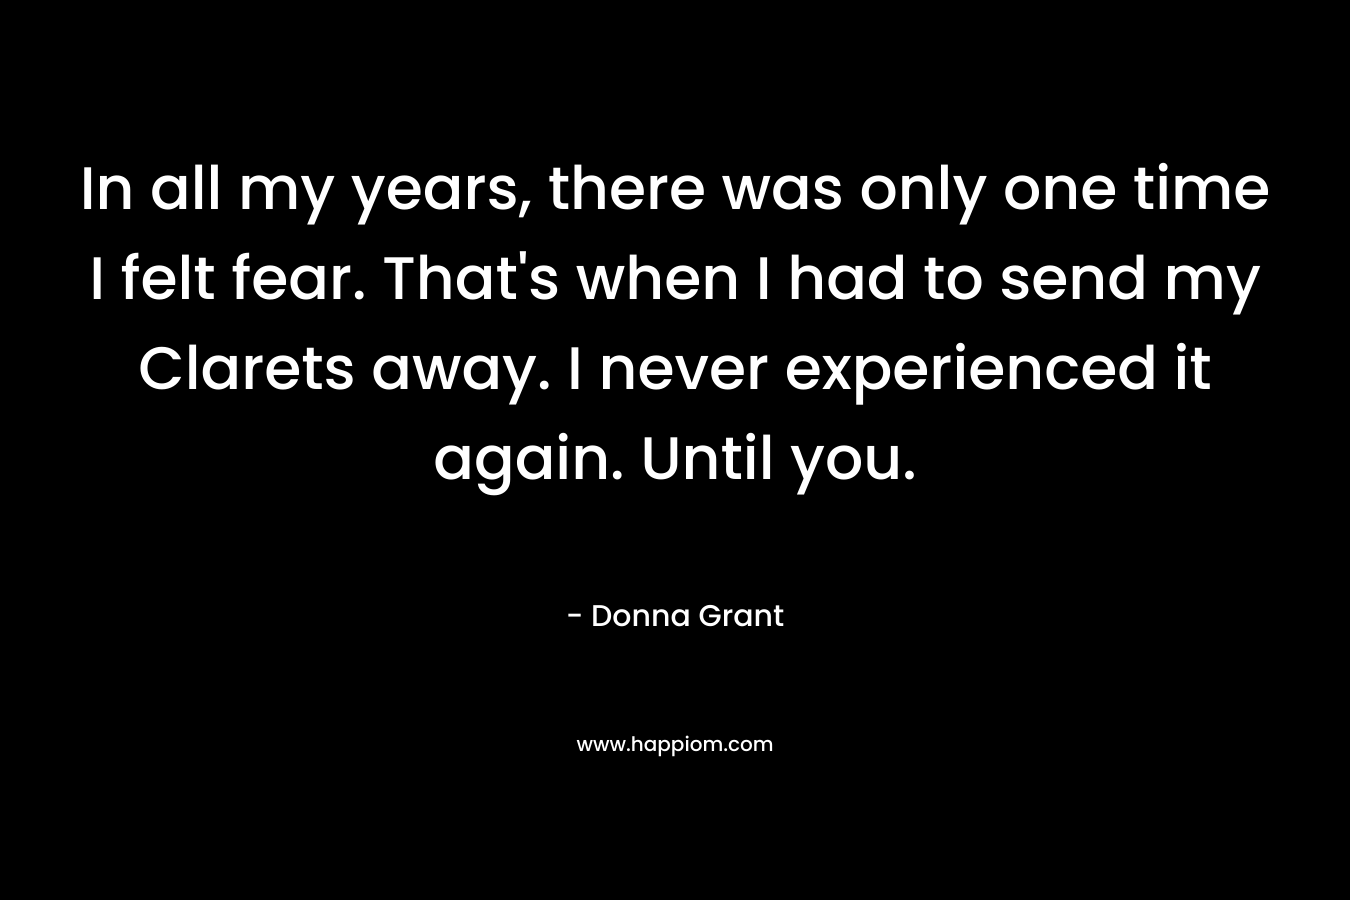 In all my years, there was only one time I felt fear. That’s when I had to send my Clarets away. I never experienced it again. Until you. – Donna Grant